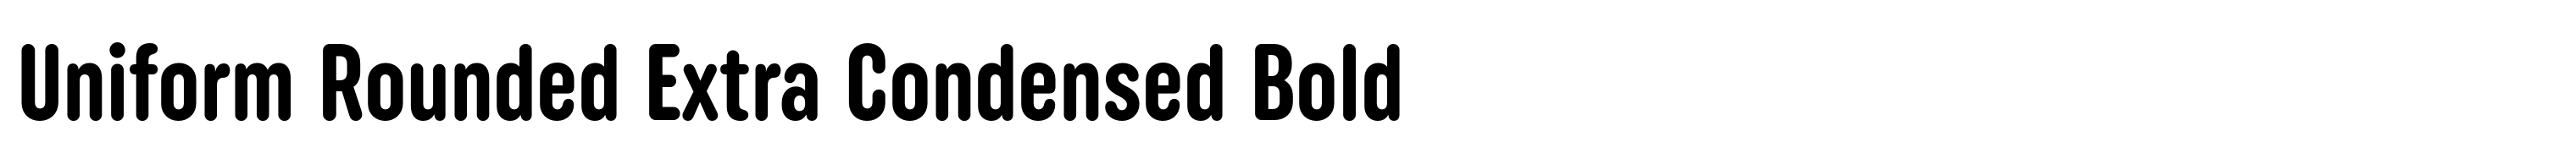 Uniform Rounded Extra Condensed Bold